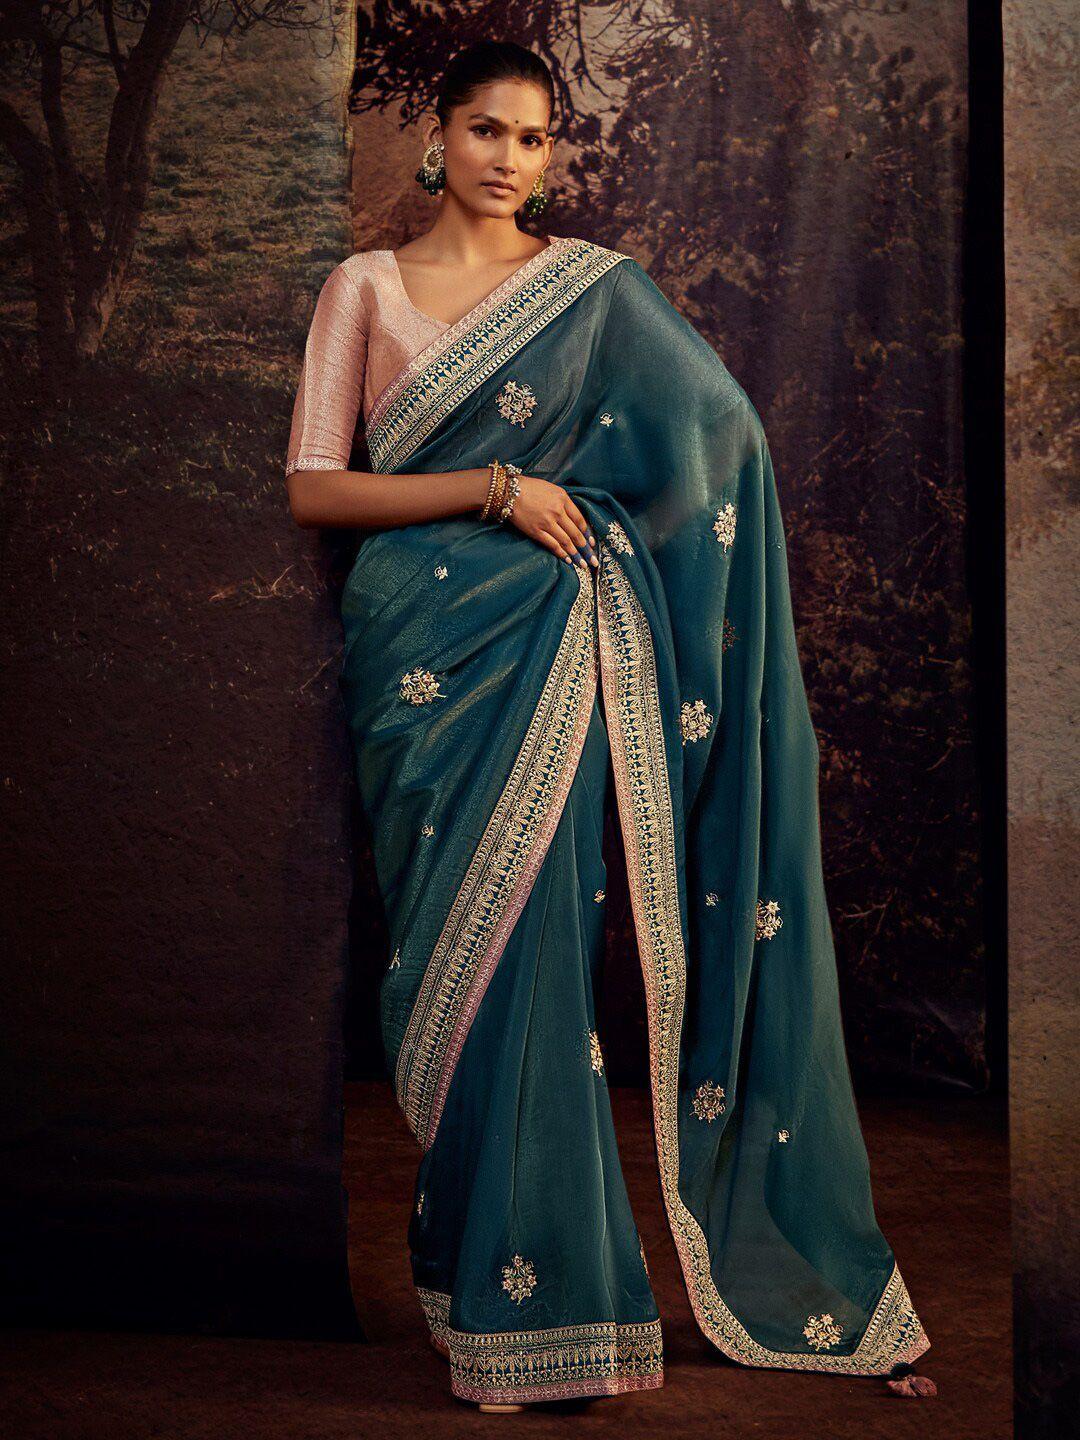 mitera teal & gold-toned ethnic motifs embroidered tissue saree